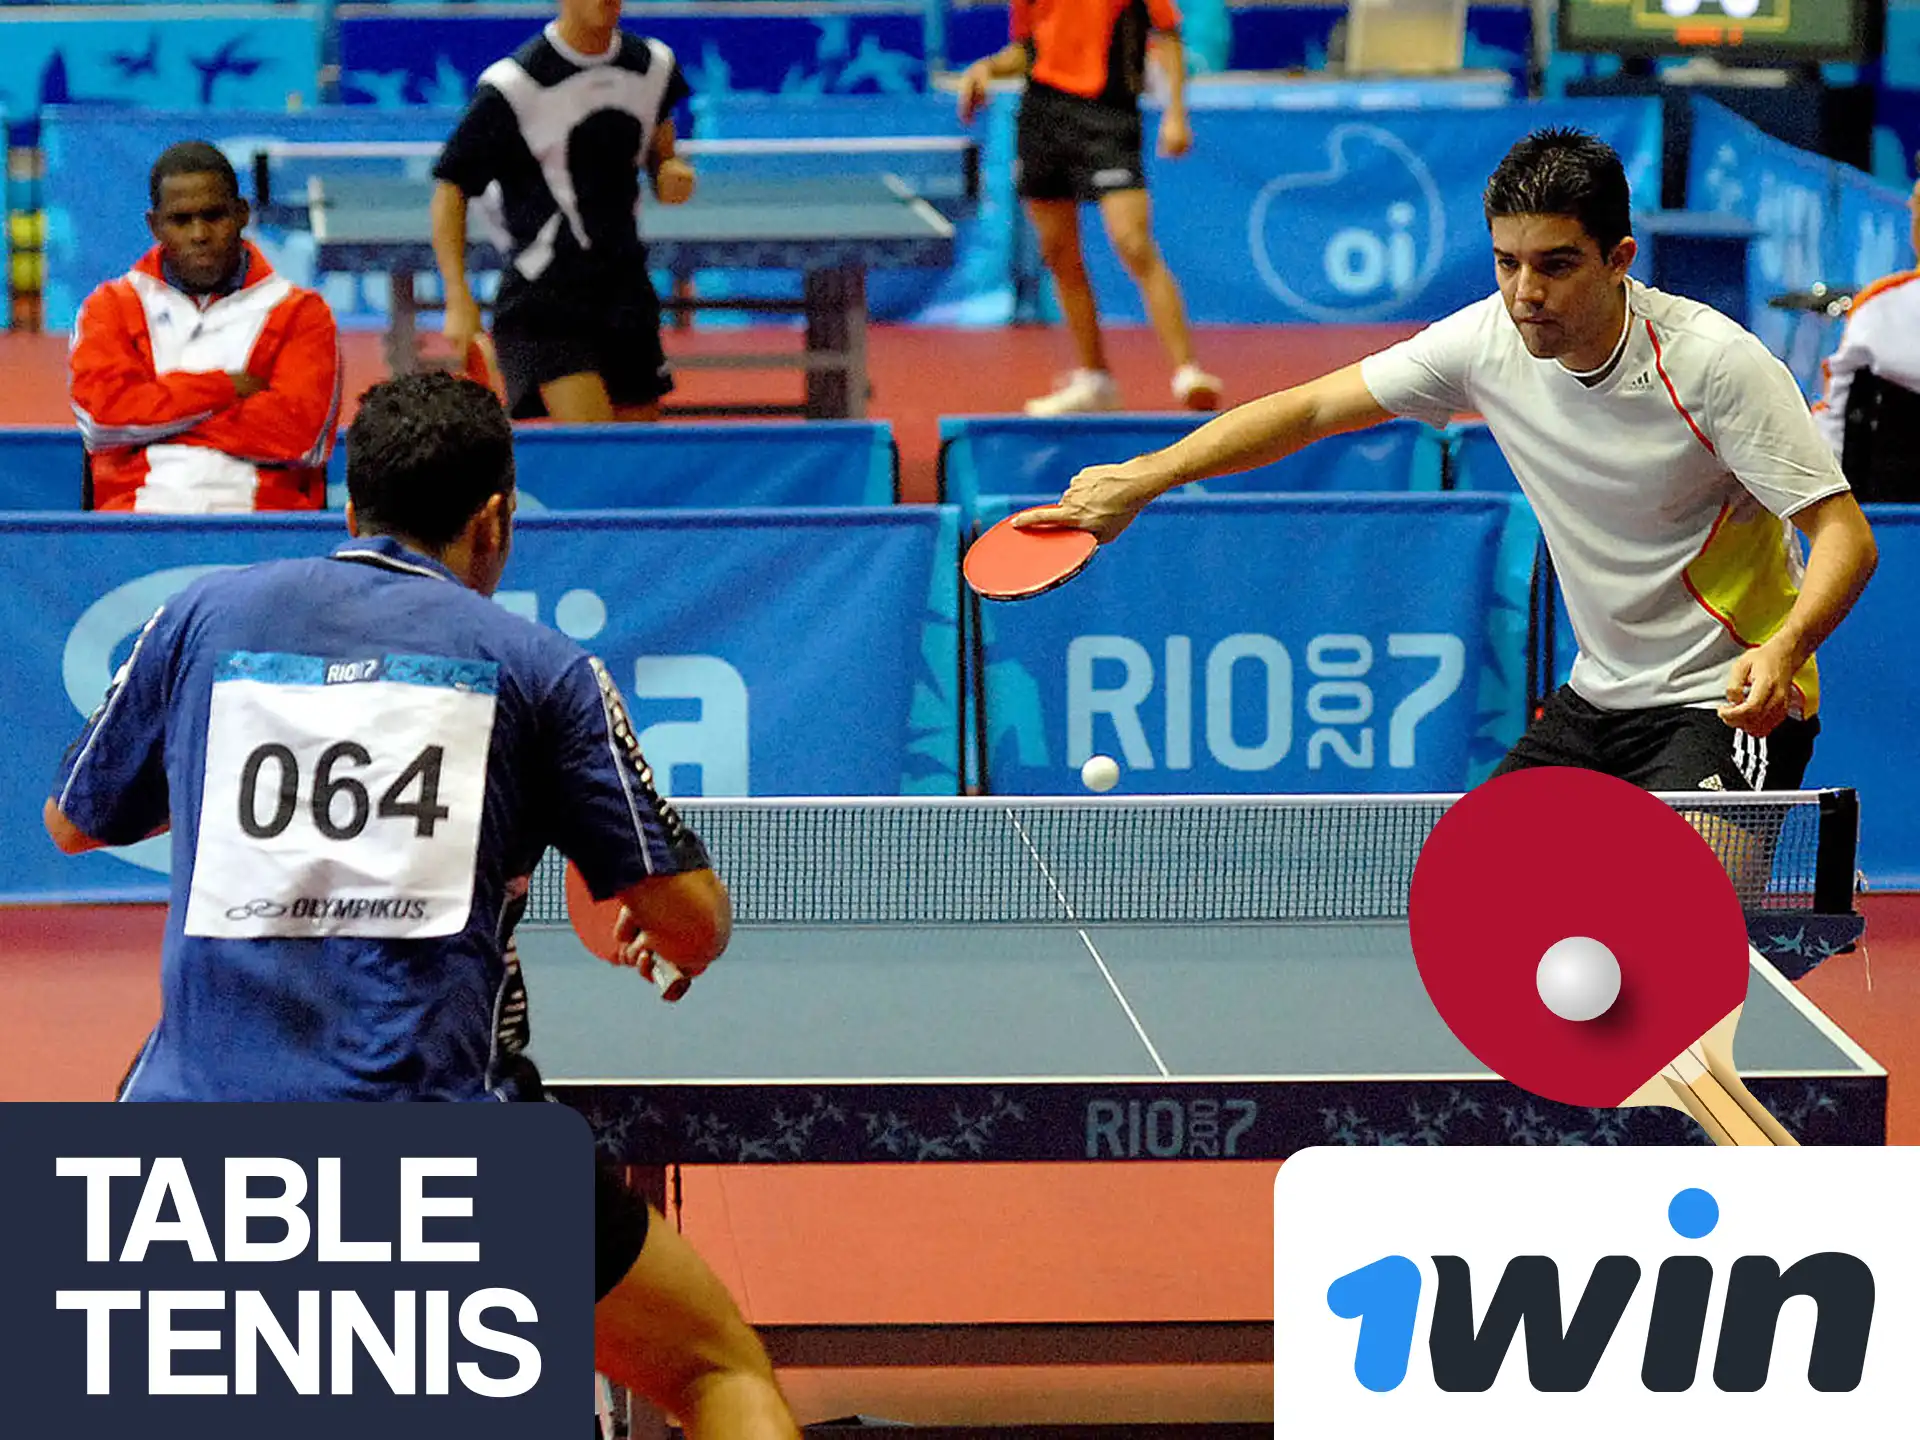 It's a exciting way of bets if your bet on table tennis at 1win.